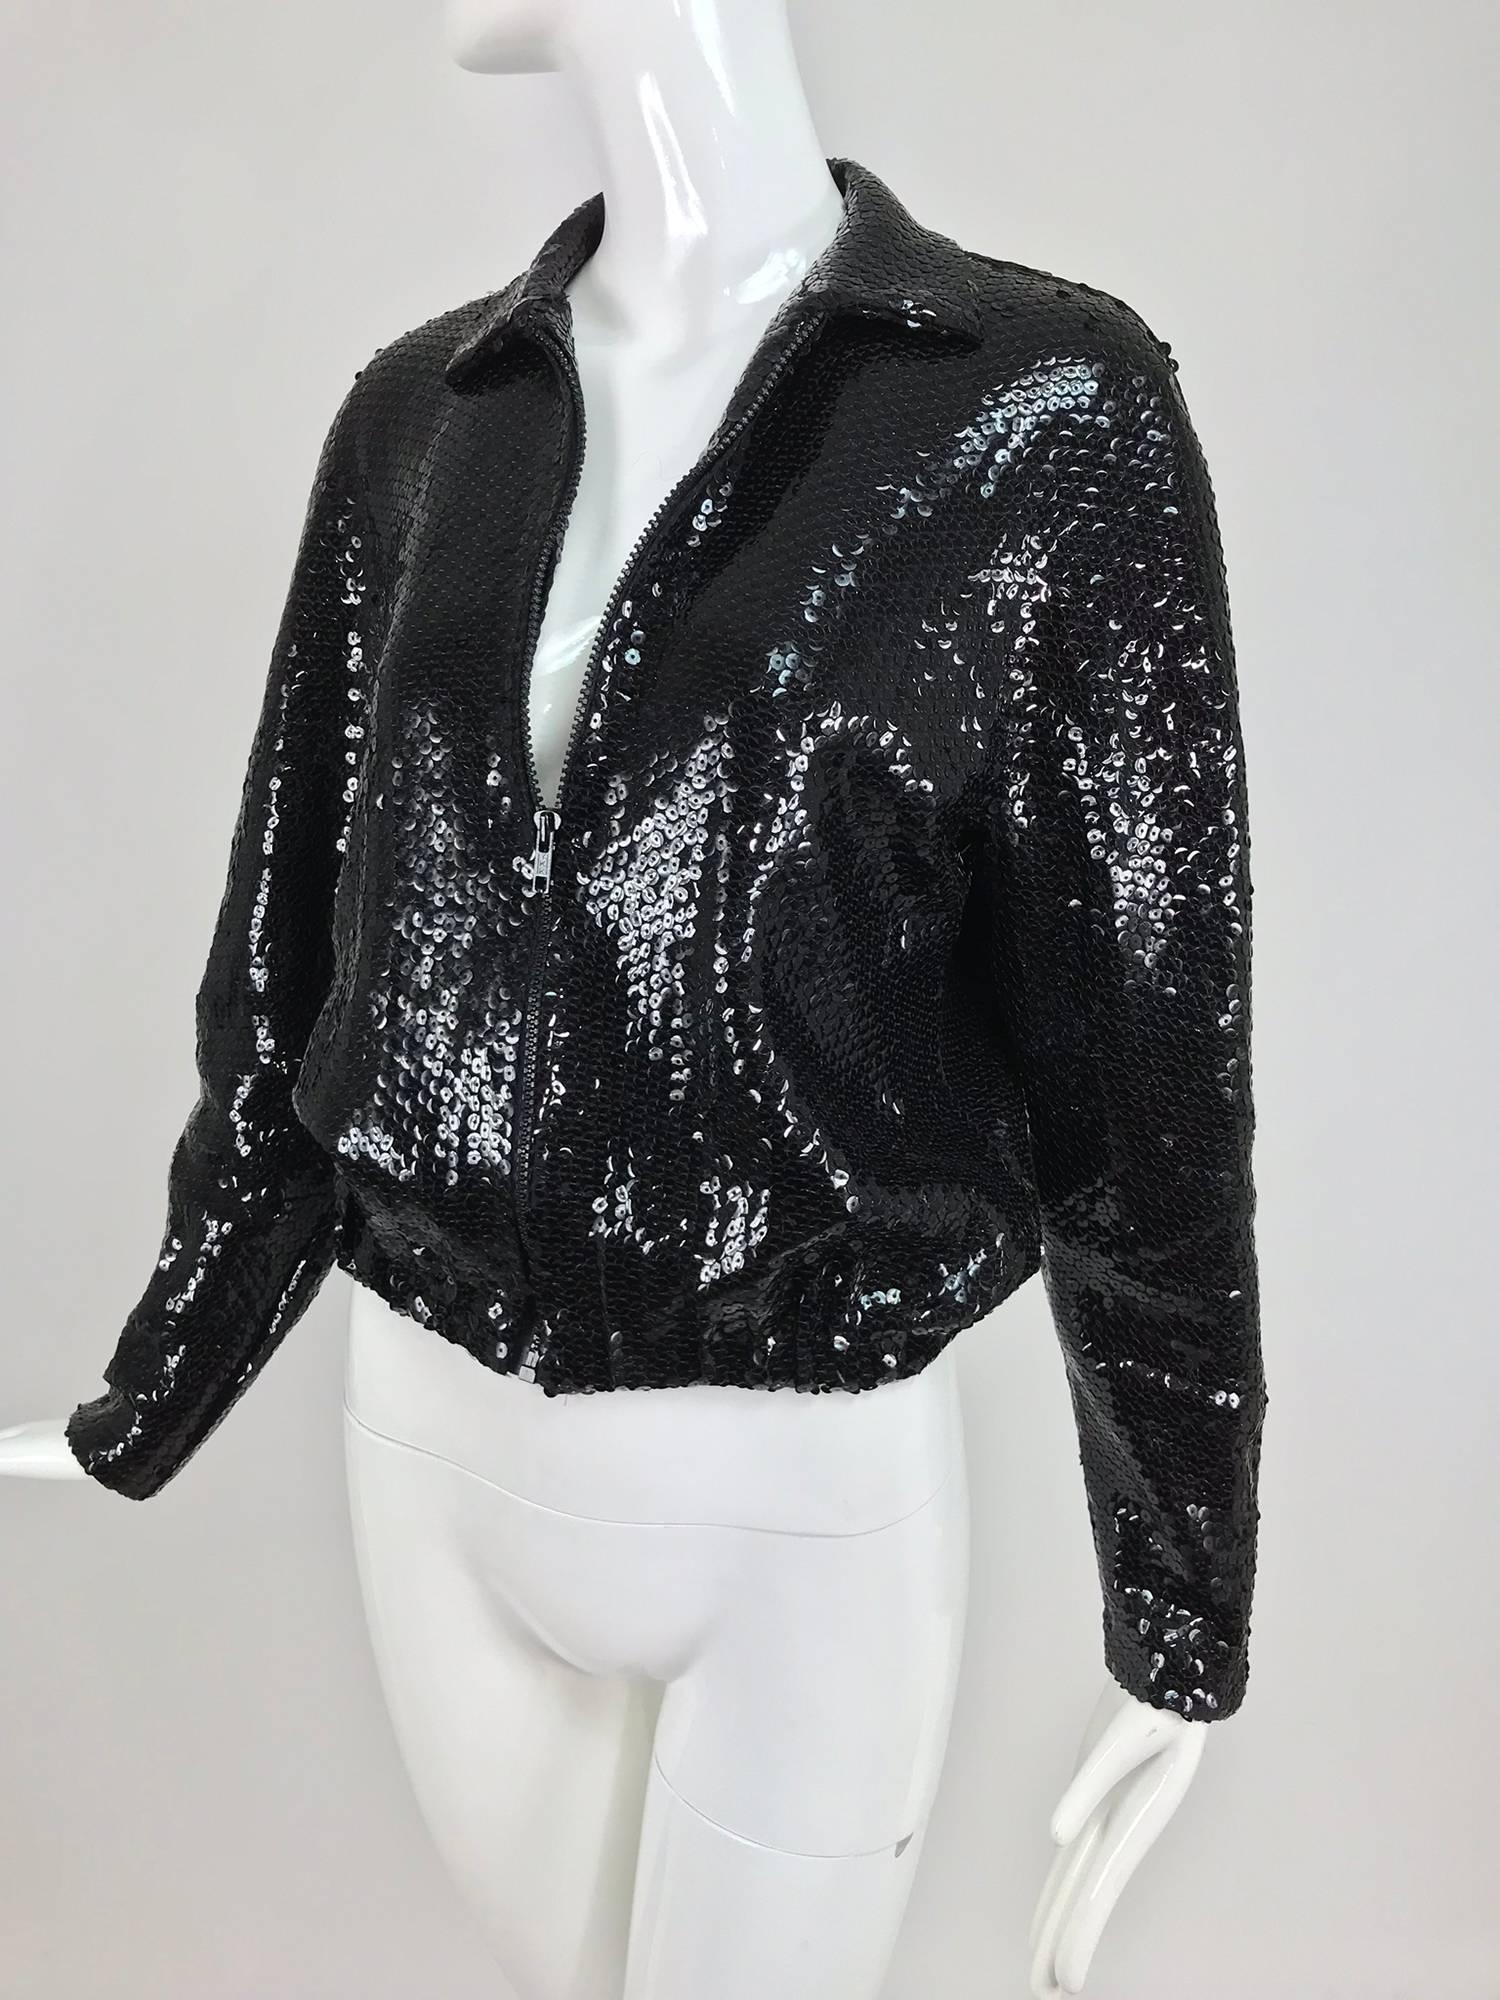 Halston black sequin zip front cropped jacket from the 1970s. Halston's signature simplicity done in a style that was copied by just about everyone in the 70s, but no one did it better than Halston. The cropped baseball jacket here in sleek black